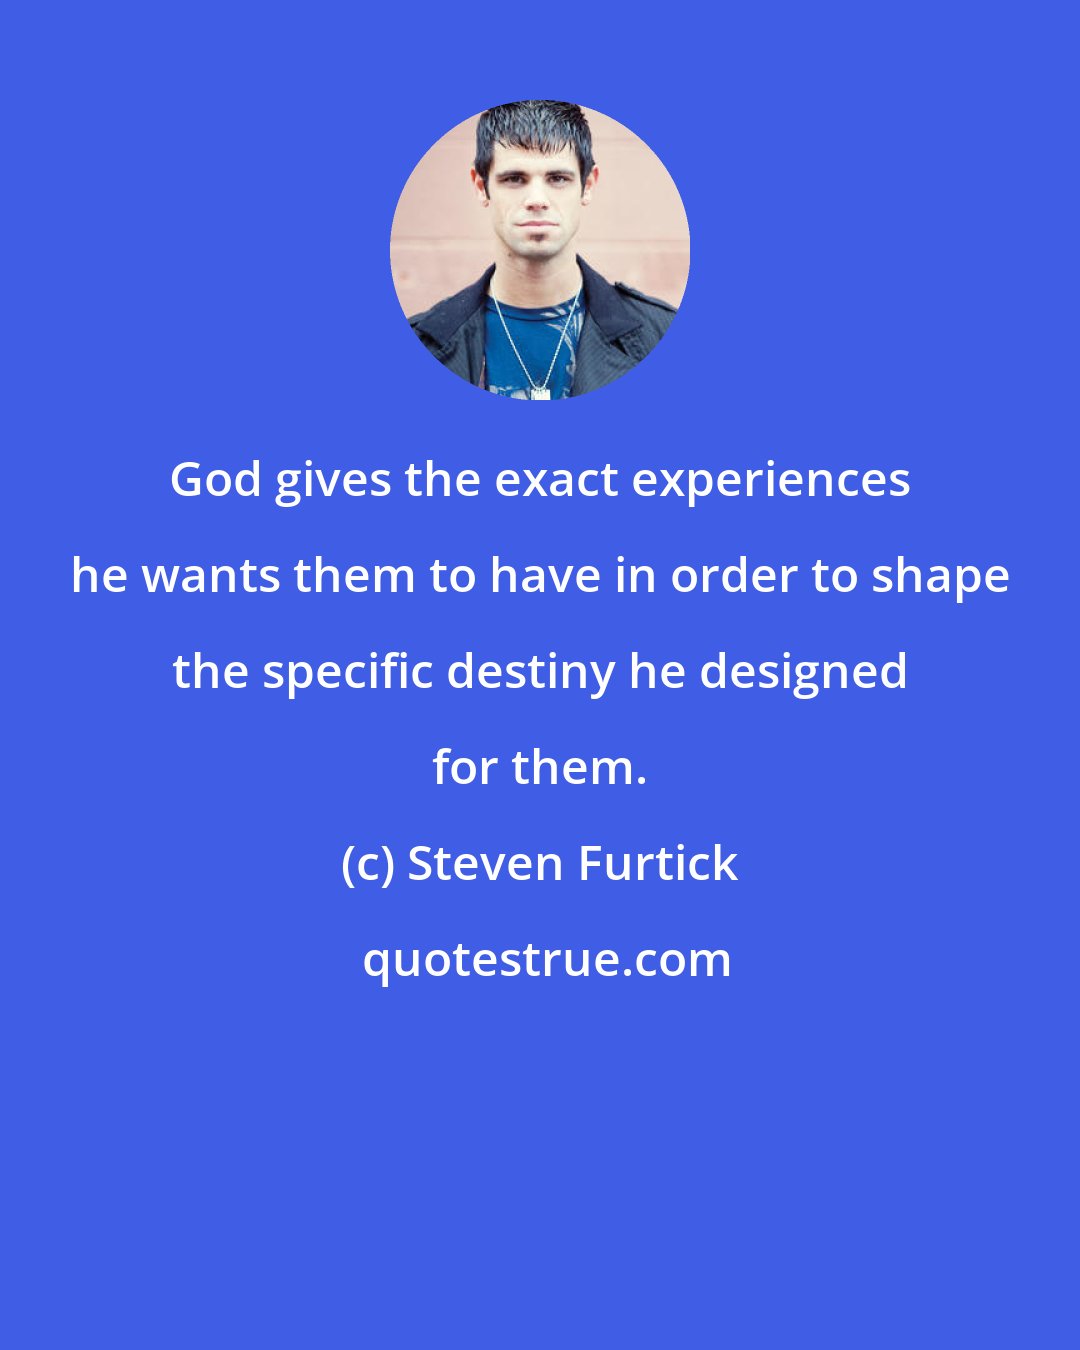 Steven Furtick: God gives the exact experiences he wants them to have in order to shape the specific destiny he designed for them.